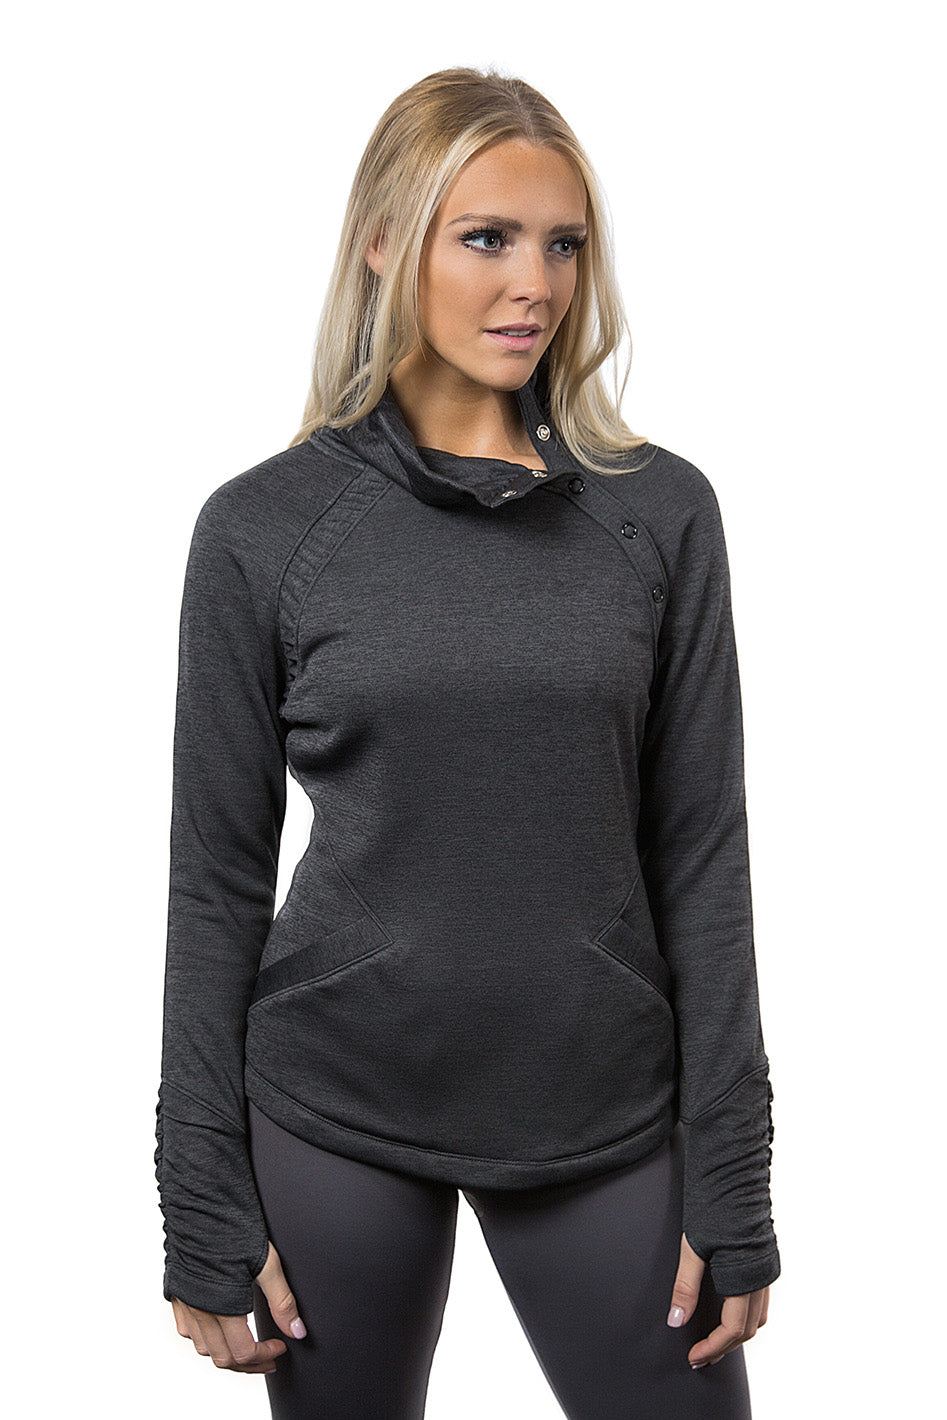 Chill Chaser Pullover